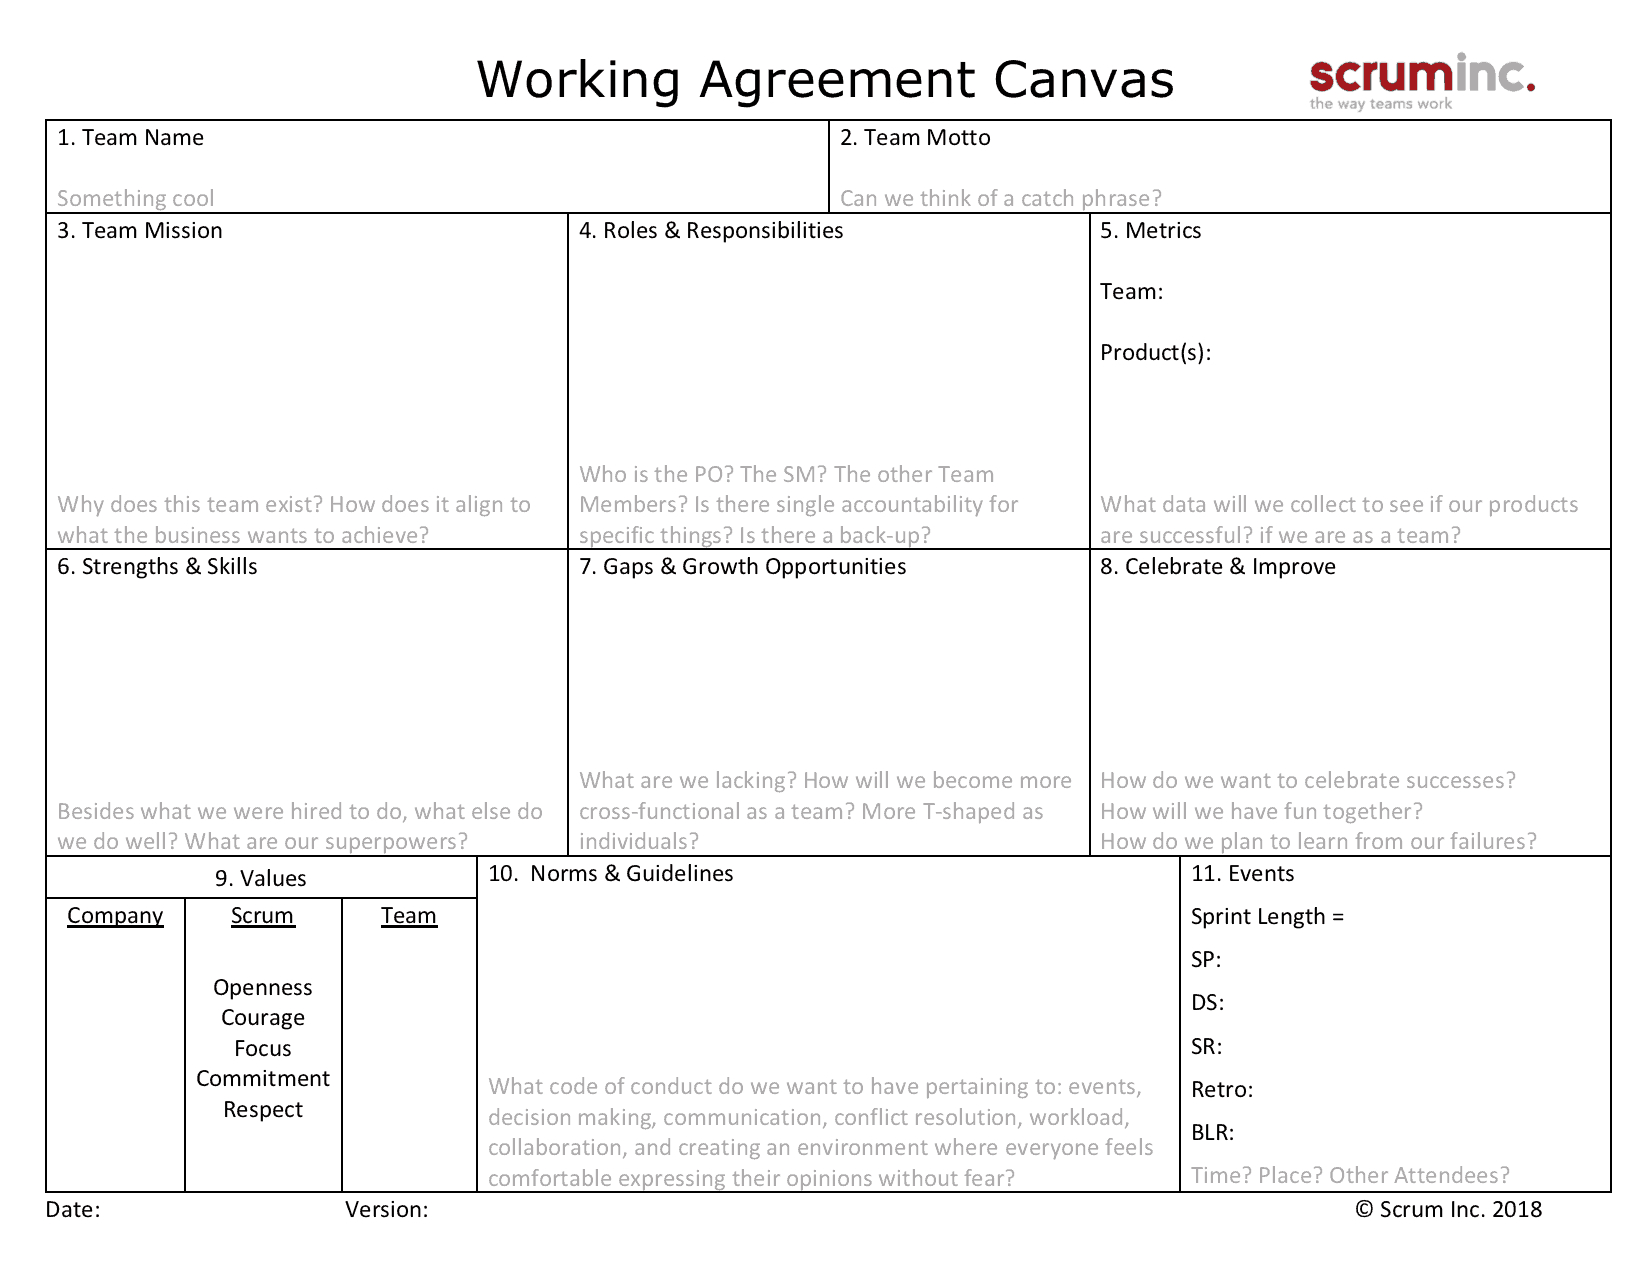 Coaching Agreement Form Team Working Agreement Canvas Scrum Inc